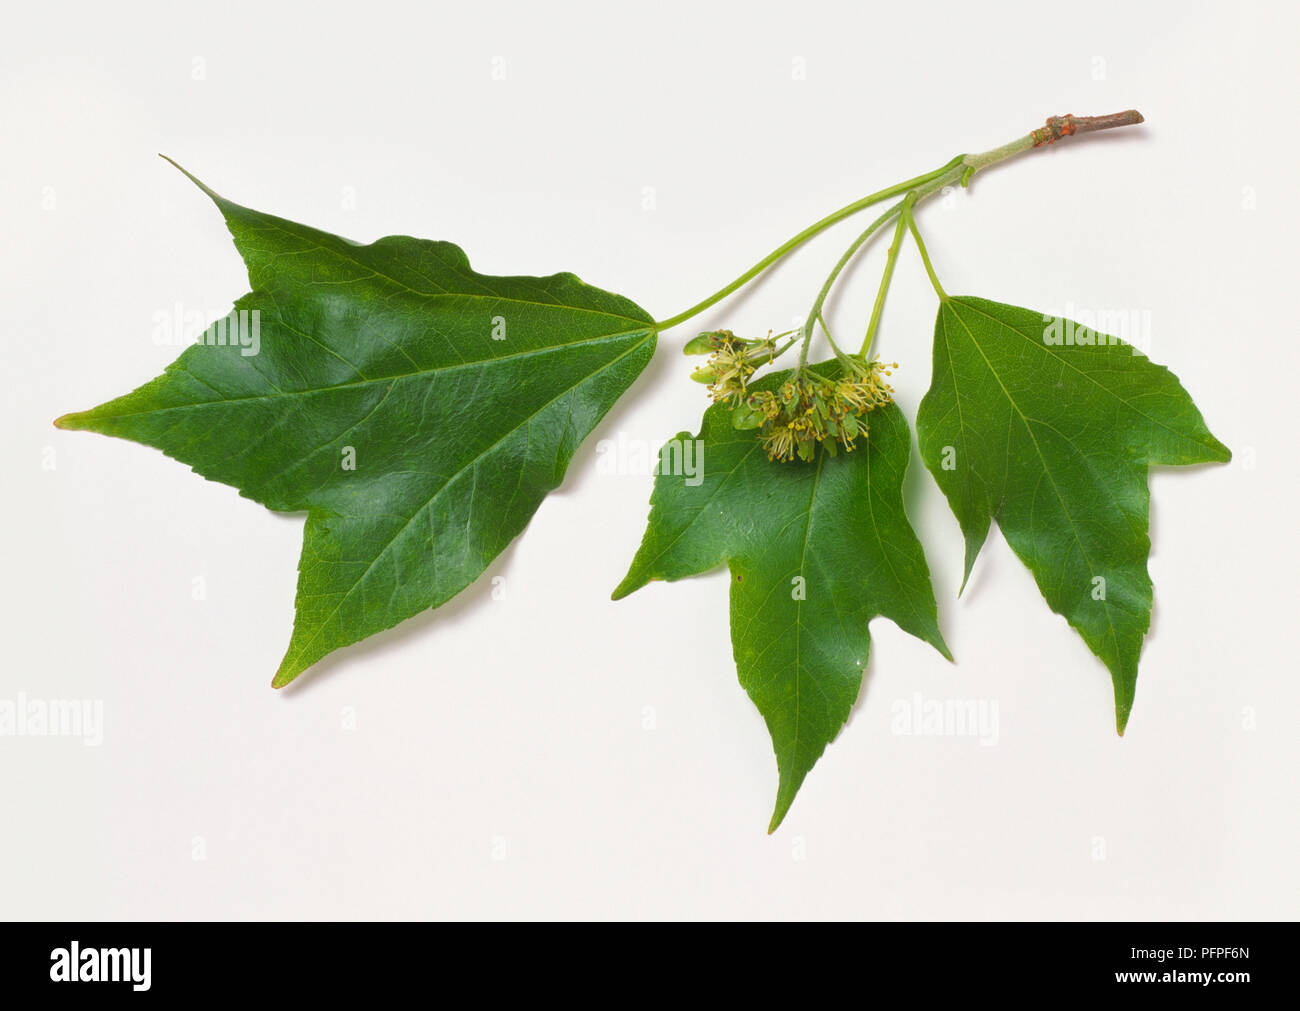 Acer buergerianum (Trident maple), branch tip with three lobed and toothed green leaves and cluster of green flowers Stock Photo